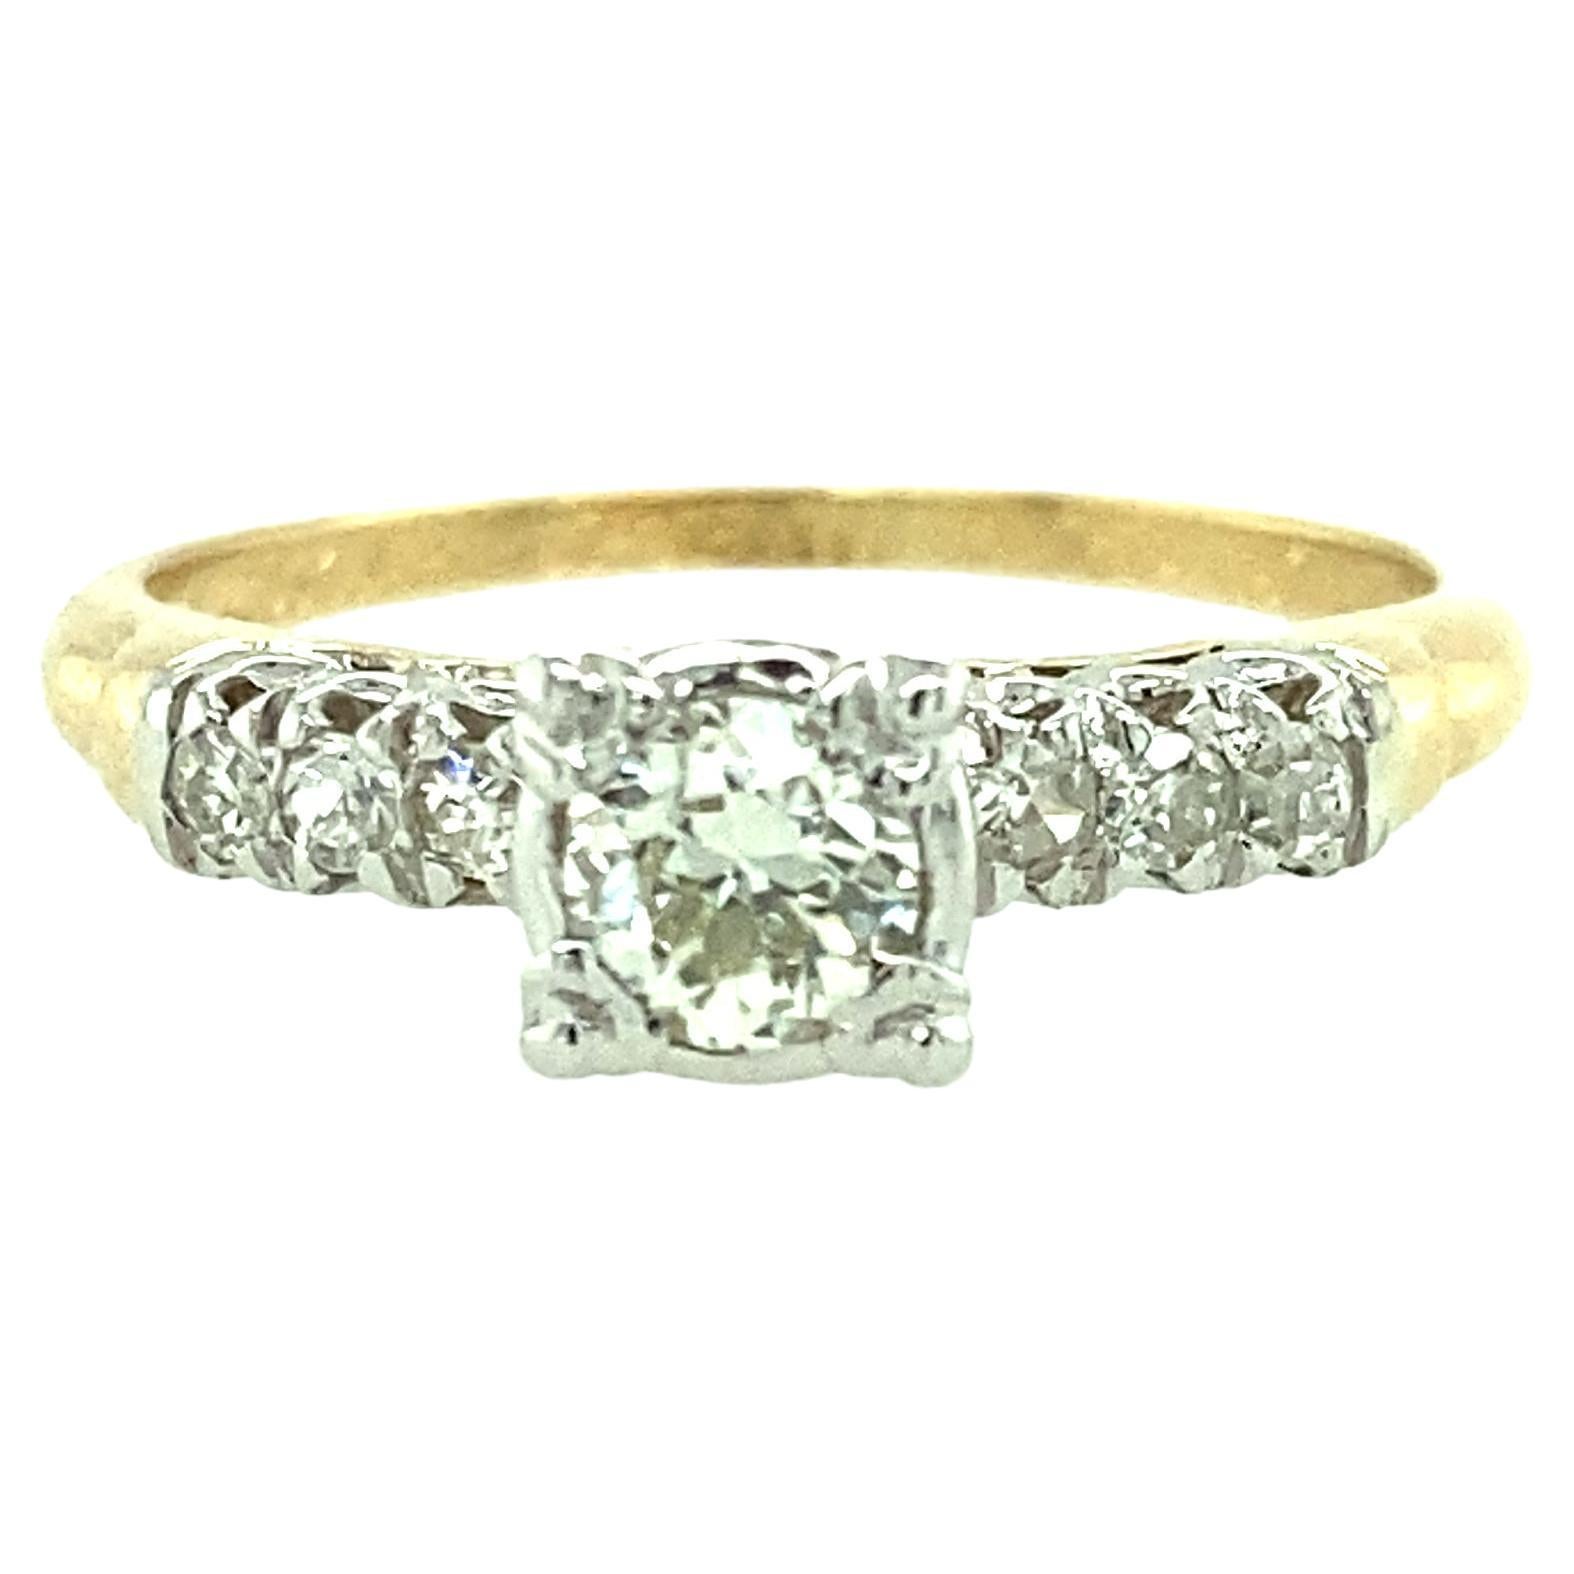 One 14 karat and 18 karat yellow and white gold diamond engagement ring set with one center Old European cut diamond, approximately 0.25 carat total weight, flanked by six single cut diamonds, approximately 0.10 carat total weight with matching H/I